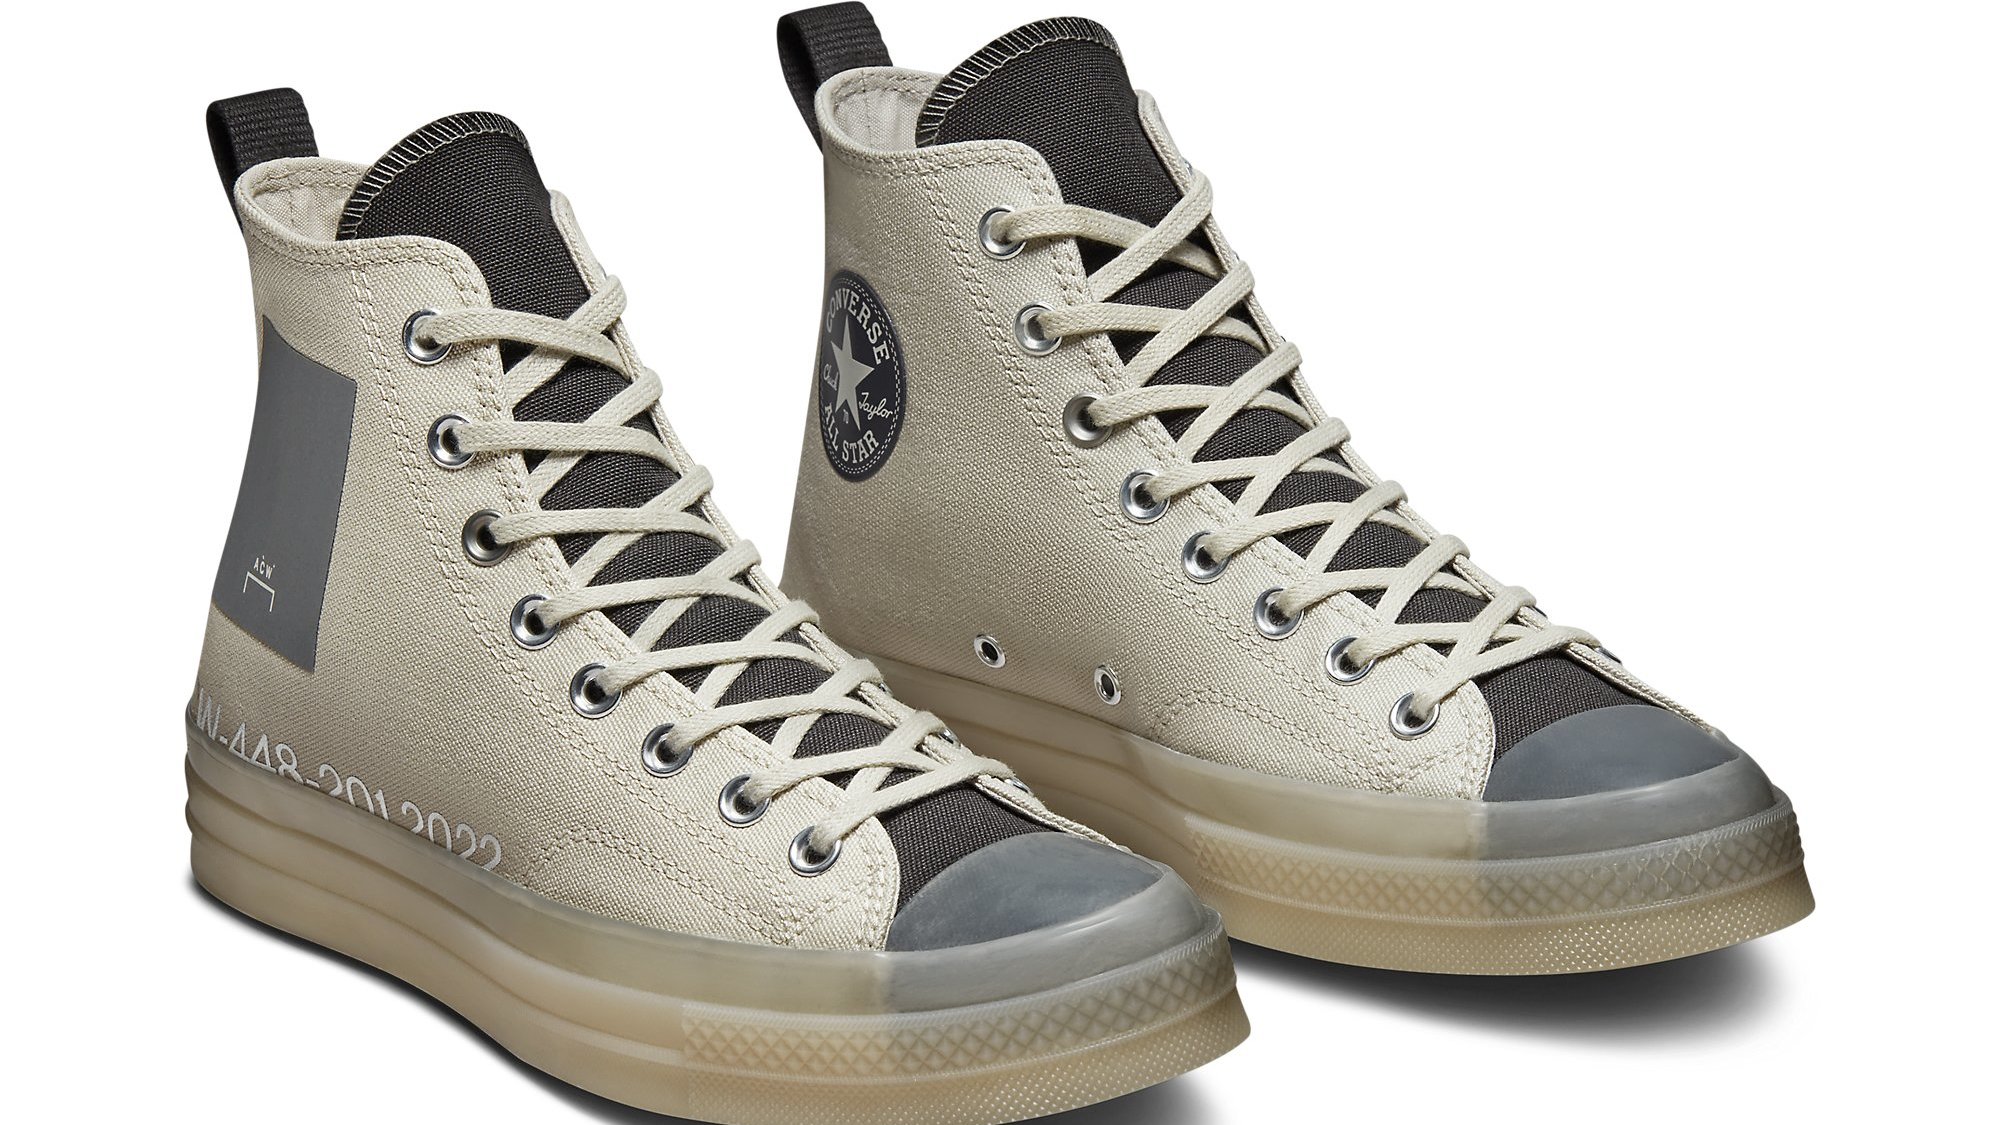 A-Cold-Wall x Converse Chuck 70 Collab Release Date | Sole Collector